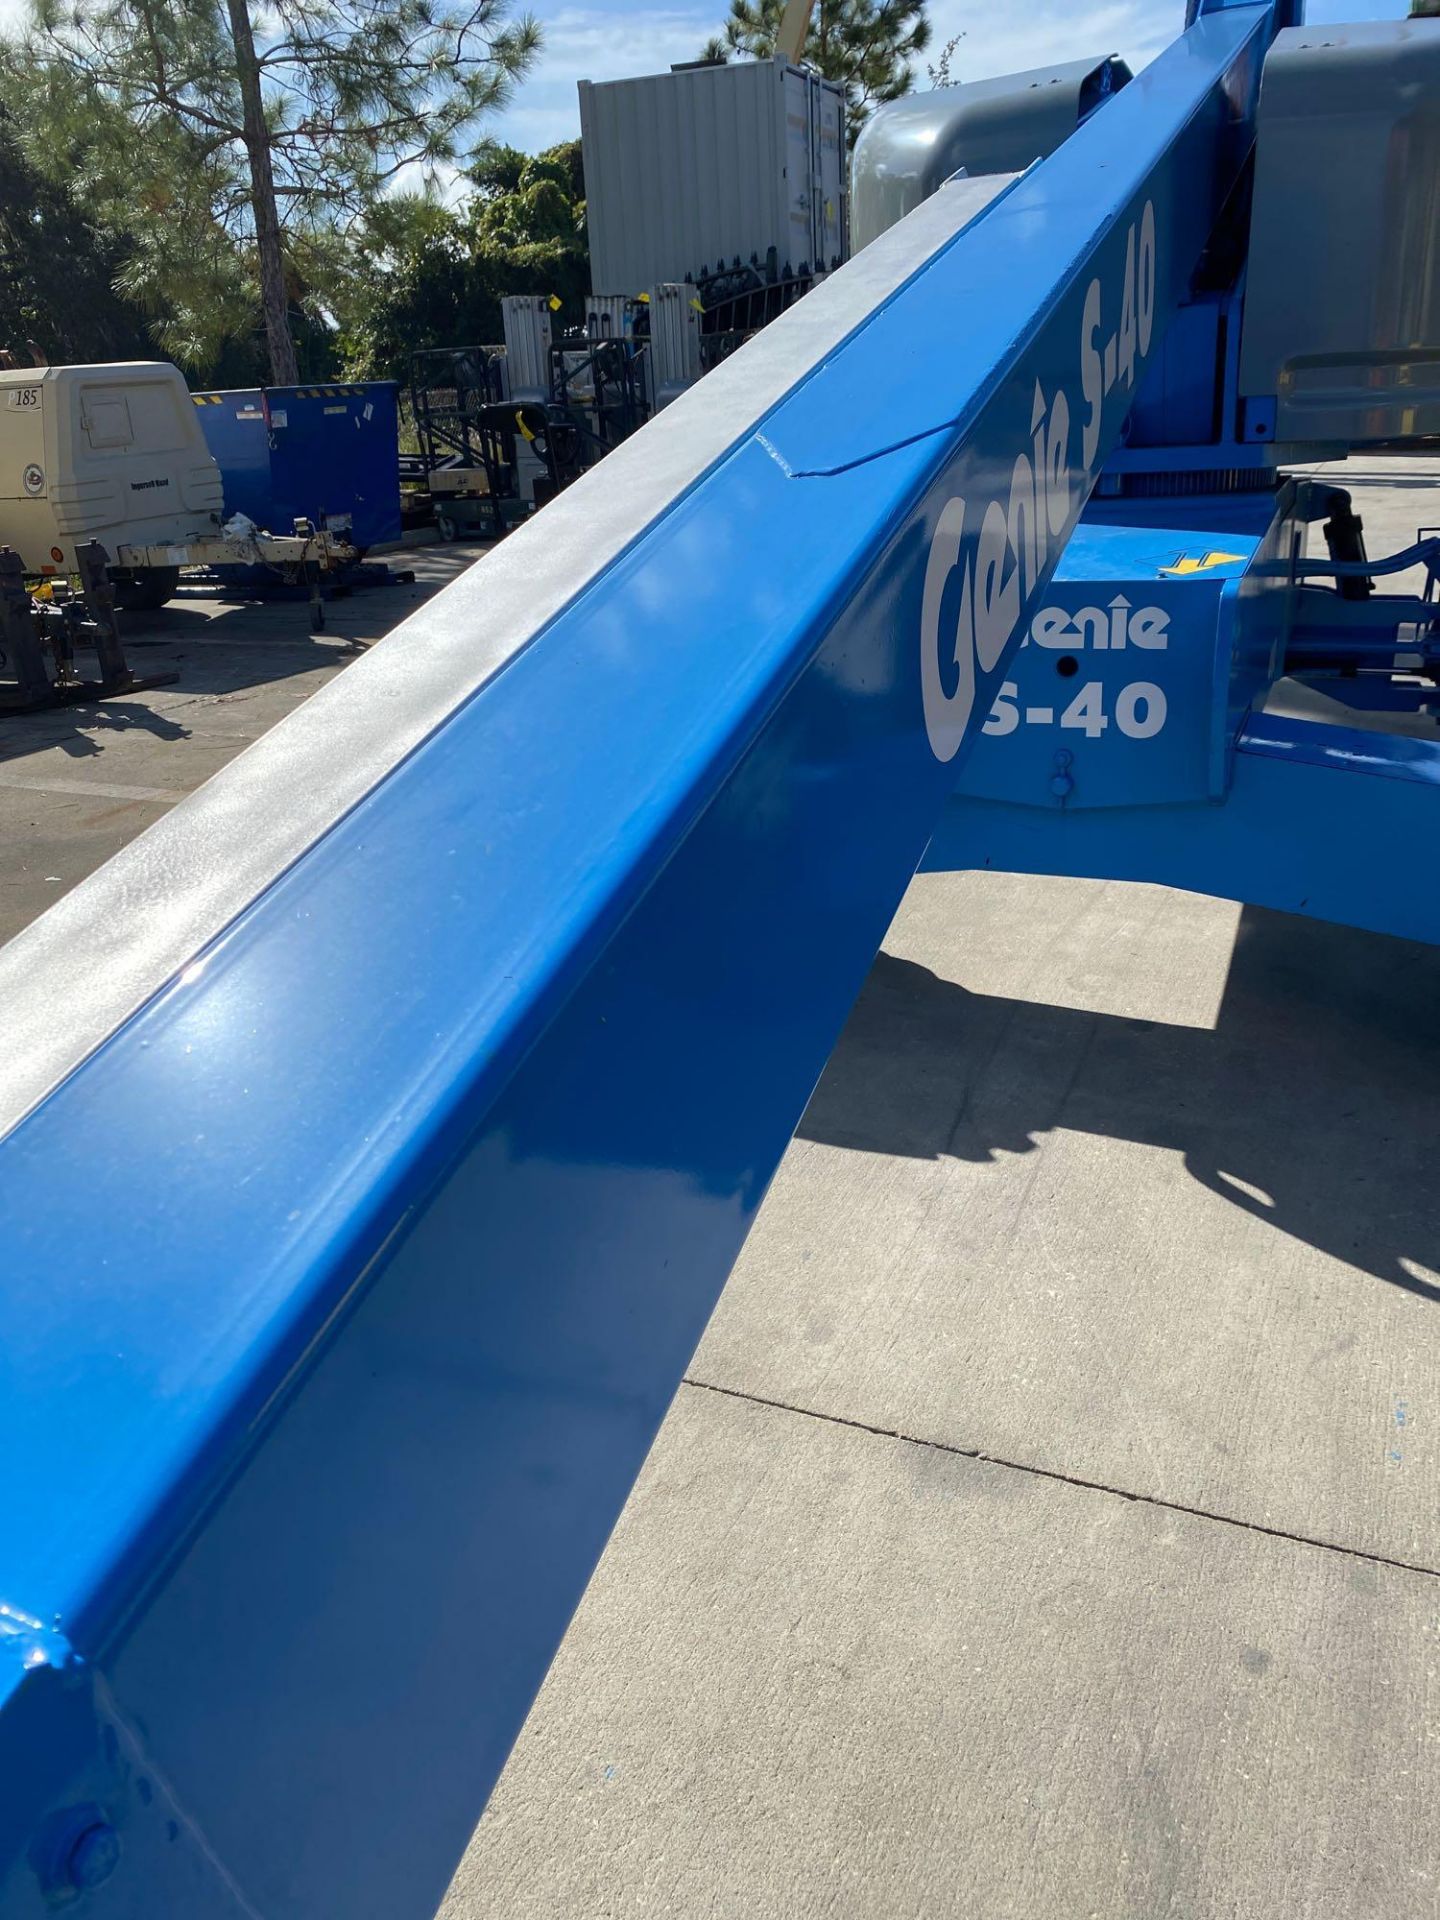 GENIE S-40 DIESEL BOOM LIFT, 4x4, 40' PLATFORM HEIGHT, RUNS AND OPERATES - Image 17 of 18